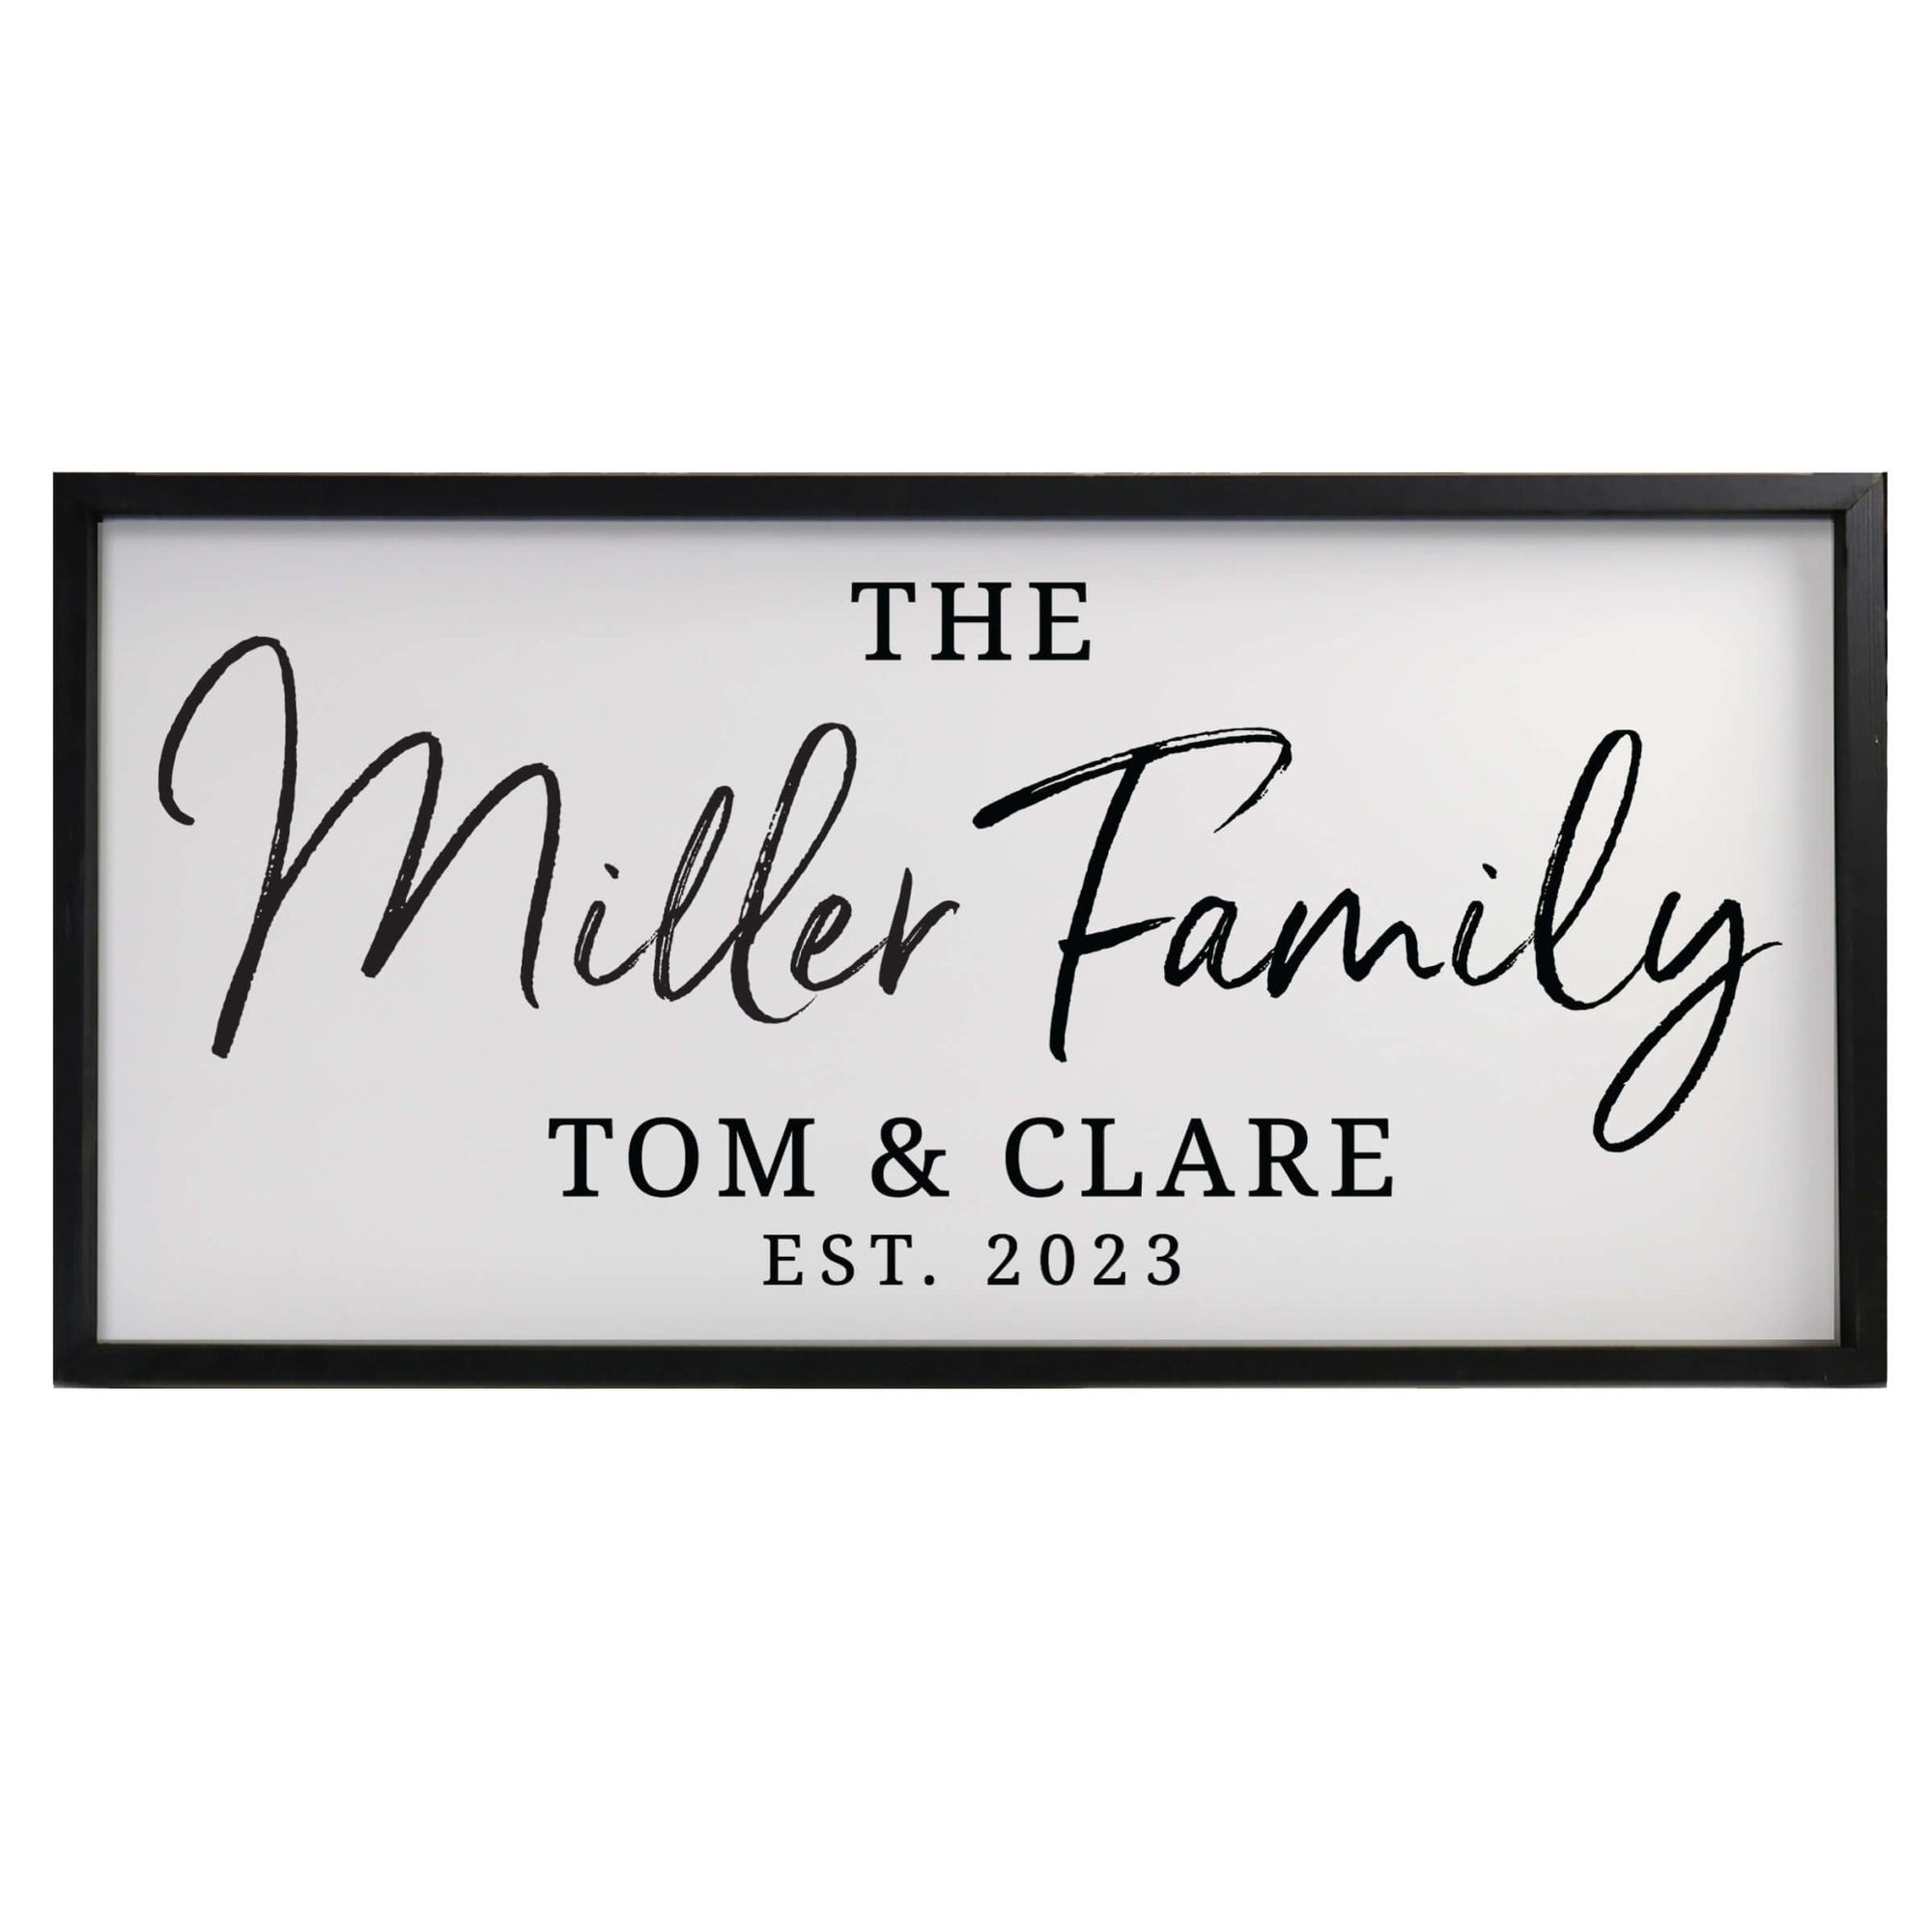 Custom Printed Family Wall Hanging Framed Shadow Box For Home Décor Ideas - The Miller Family - LifeSong Milestones